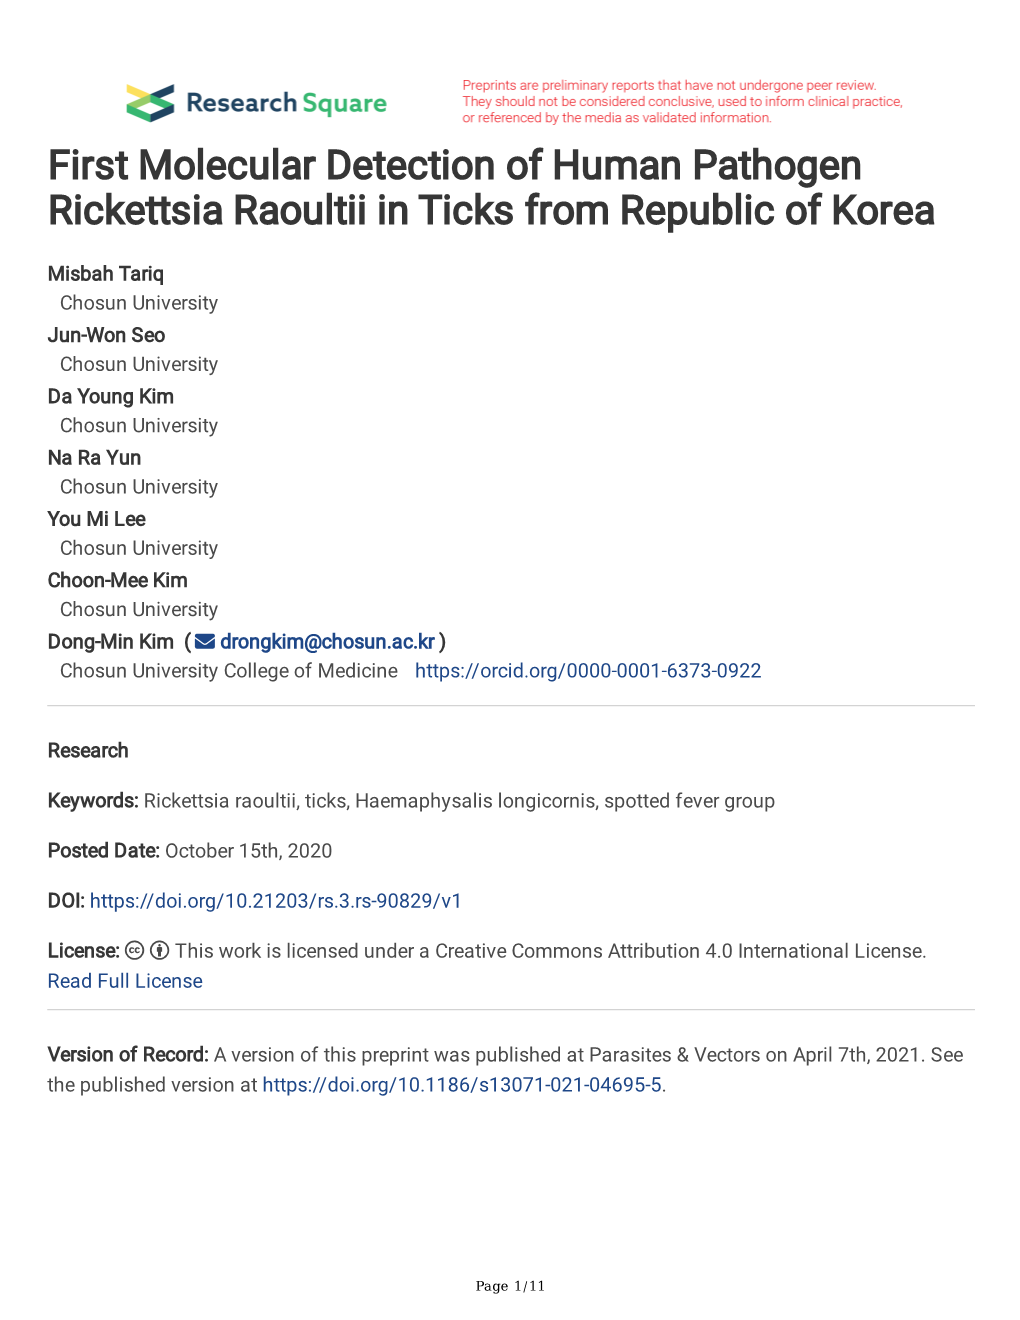 First Molecular Detection of Human Pathogen Rickettsia Raoultii in Ticks from Republic of Korea